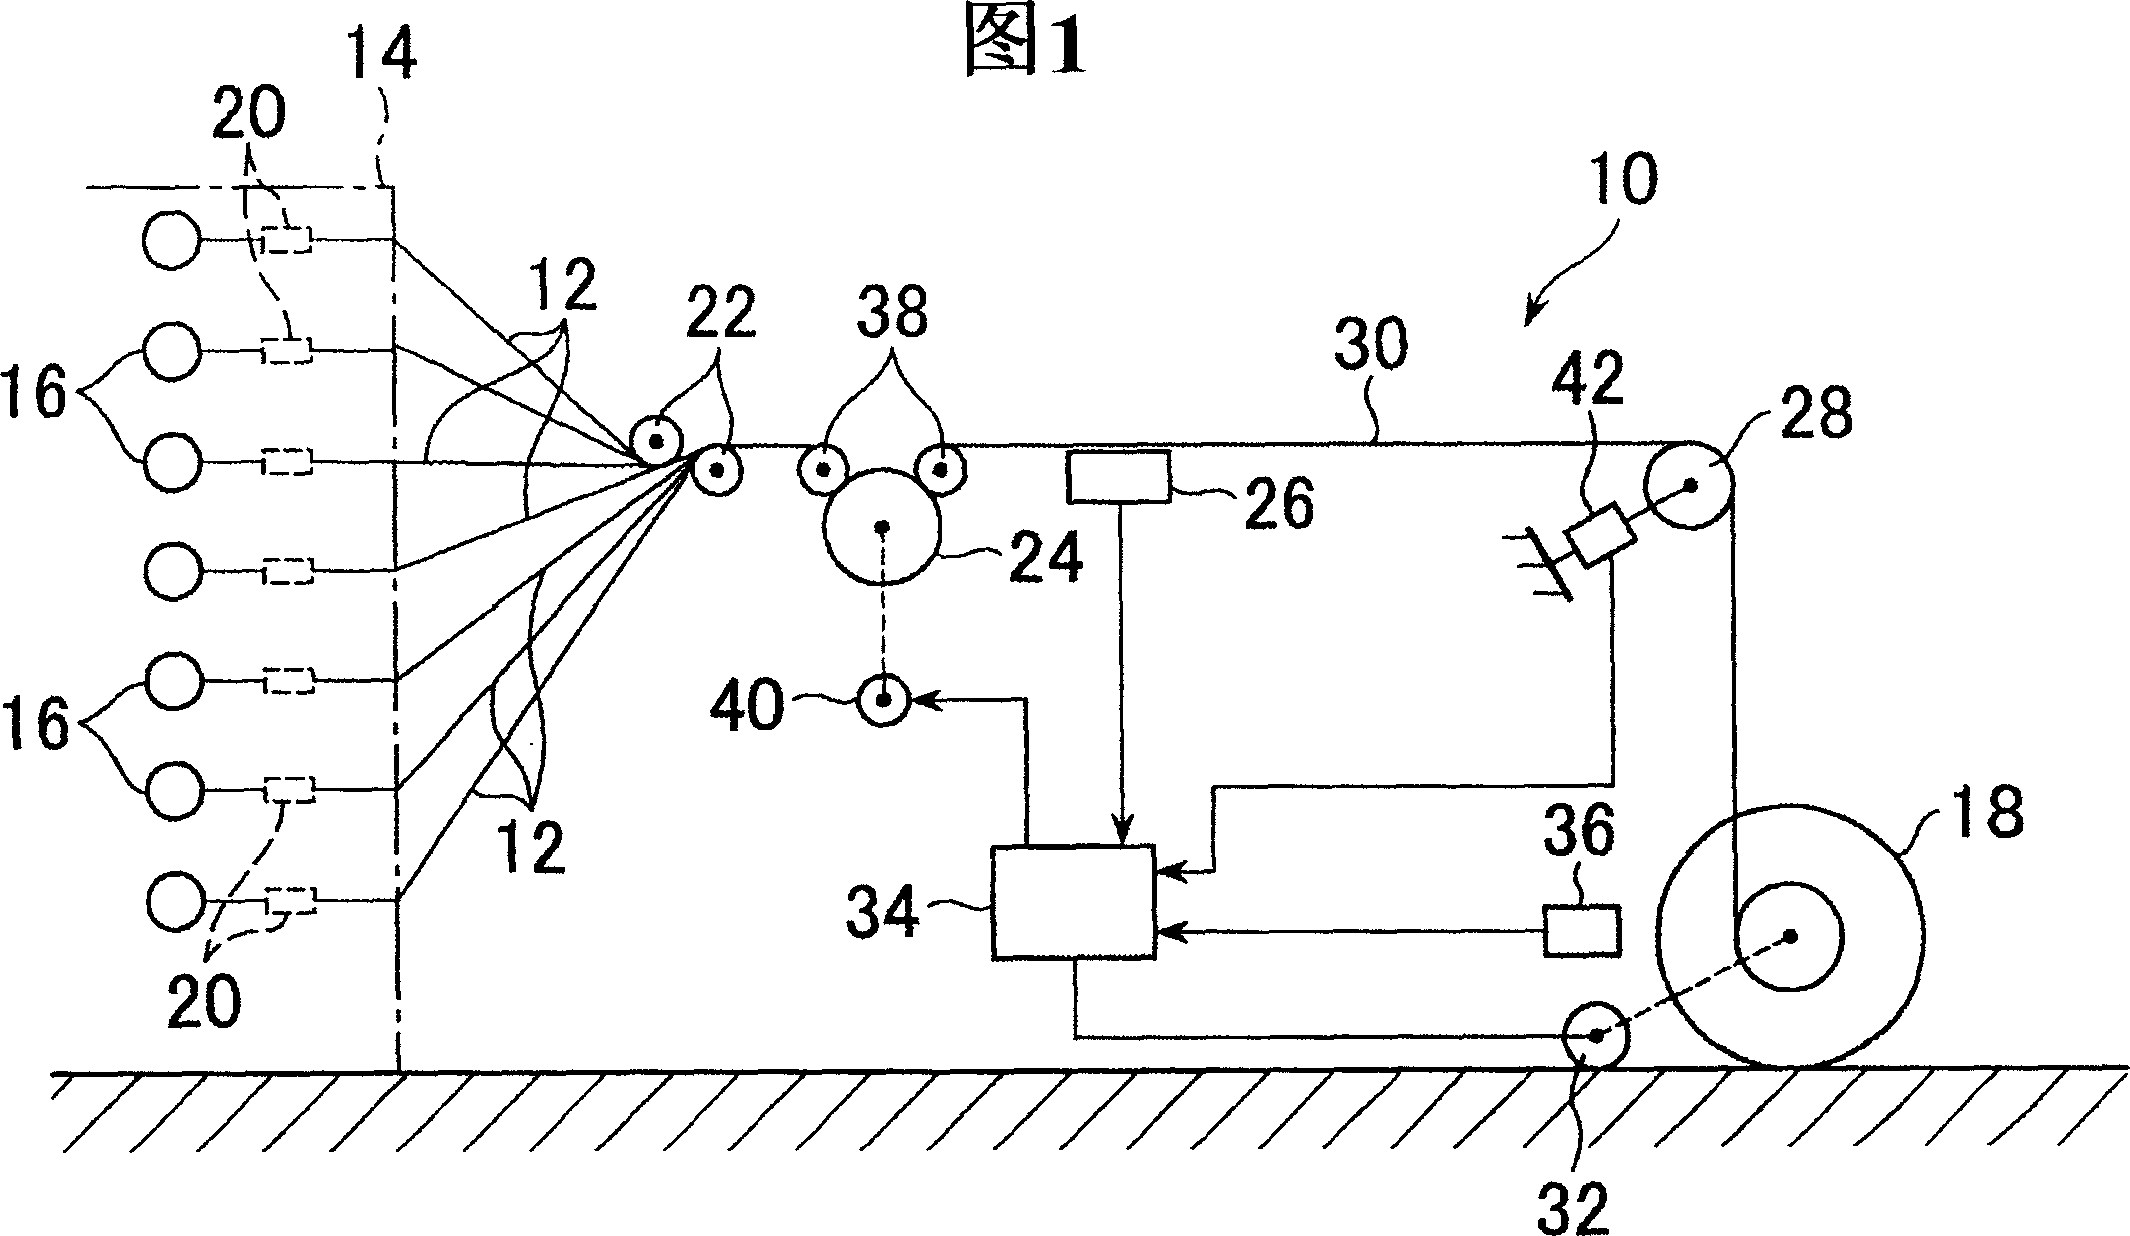 Defining and displaying device of fiber machine